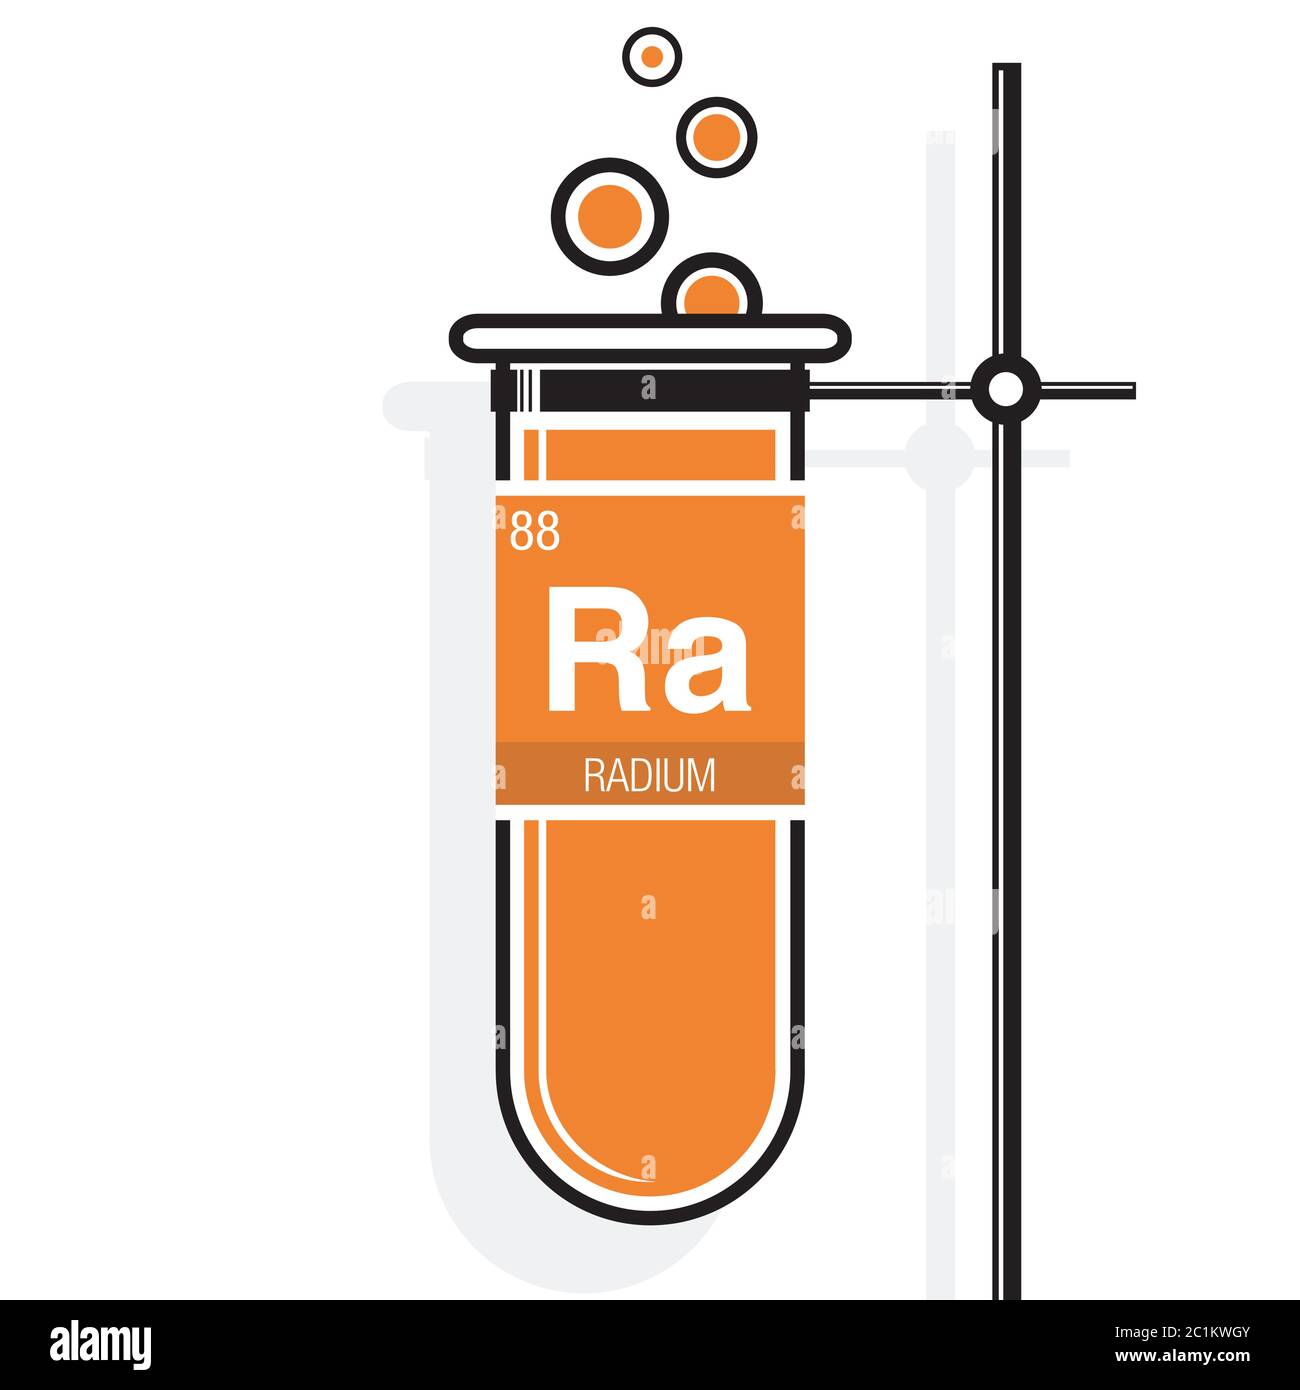 Radium symbol on label in a orange test tube with holder. Element number 88 of the Periodic Table of the Elements - Chemistry Stock Vector